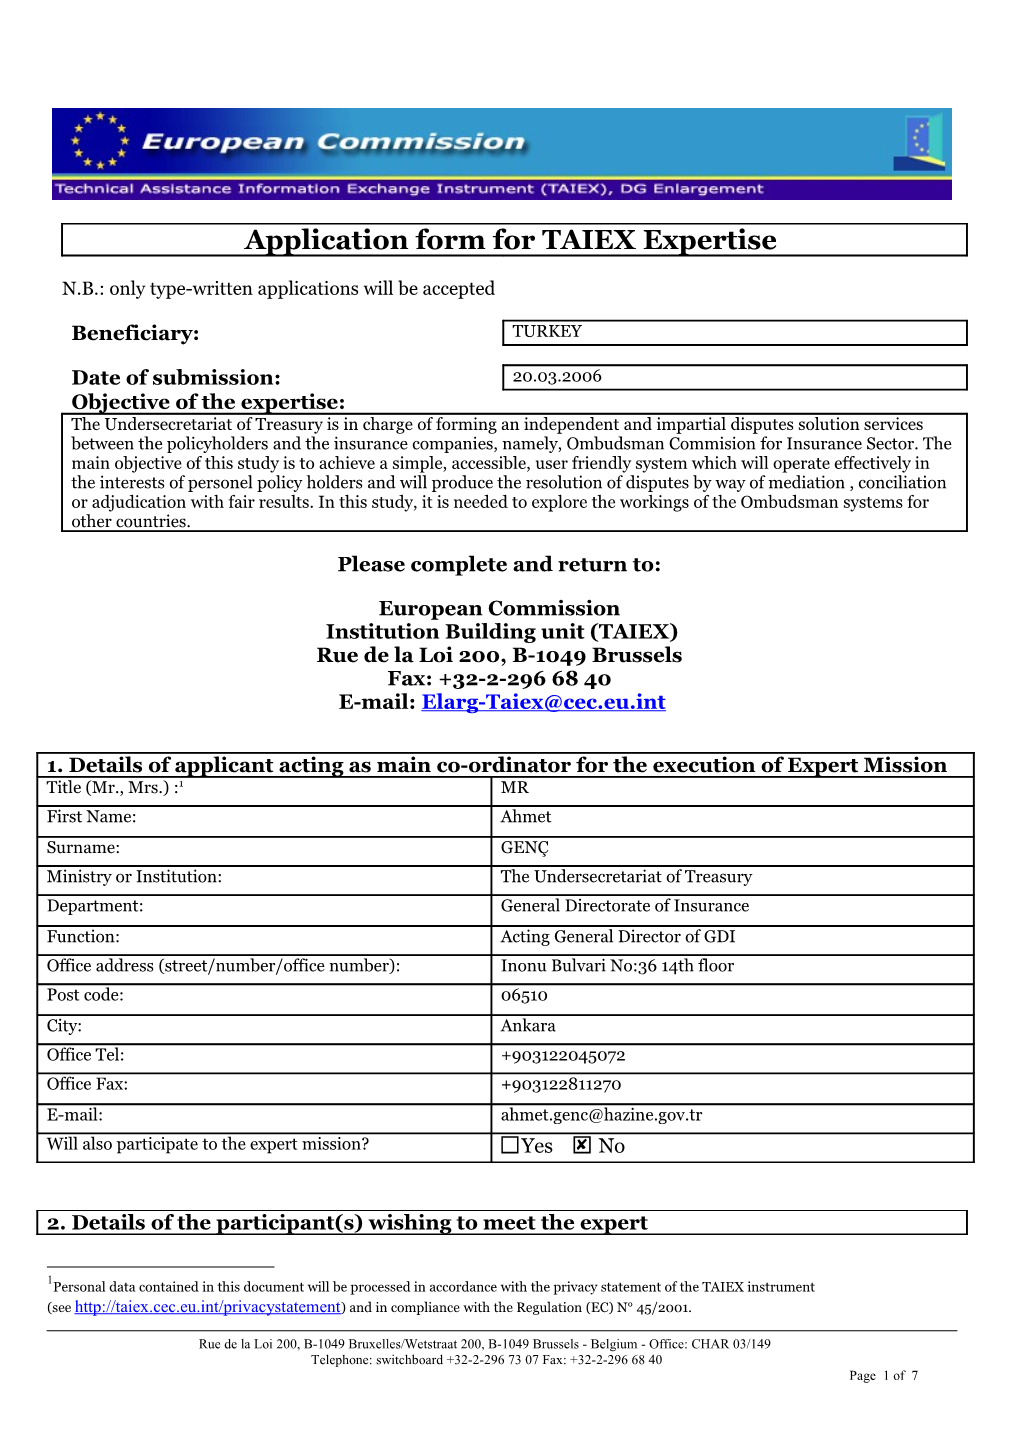 Application Form for TAIEX Expertise